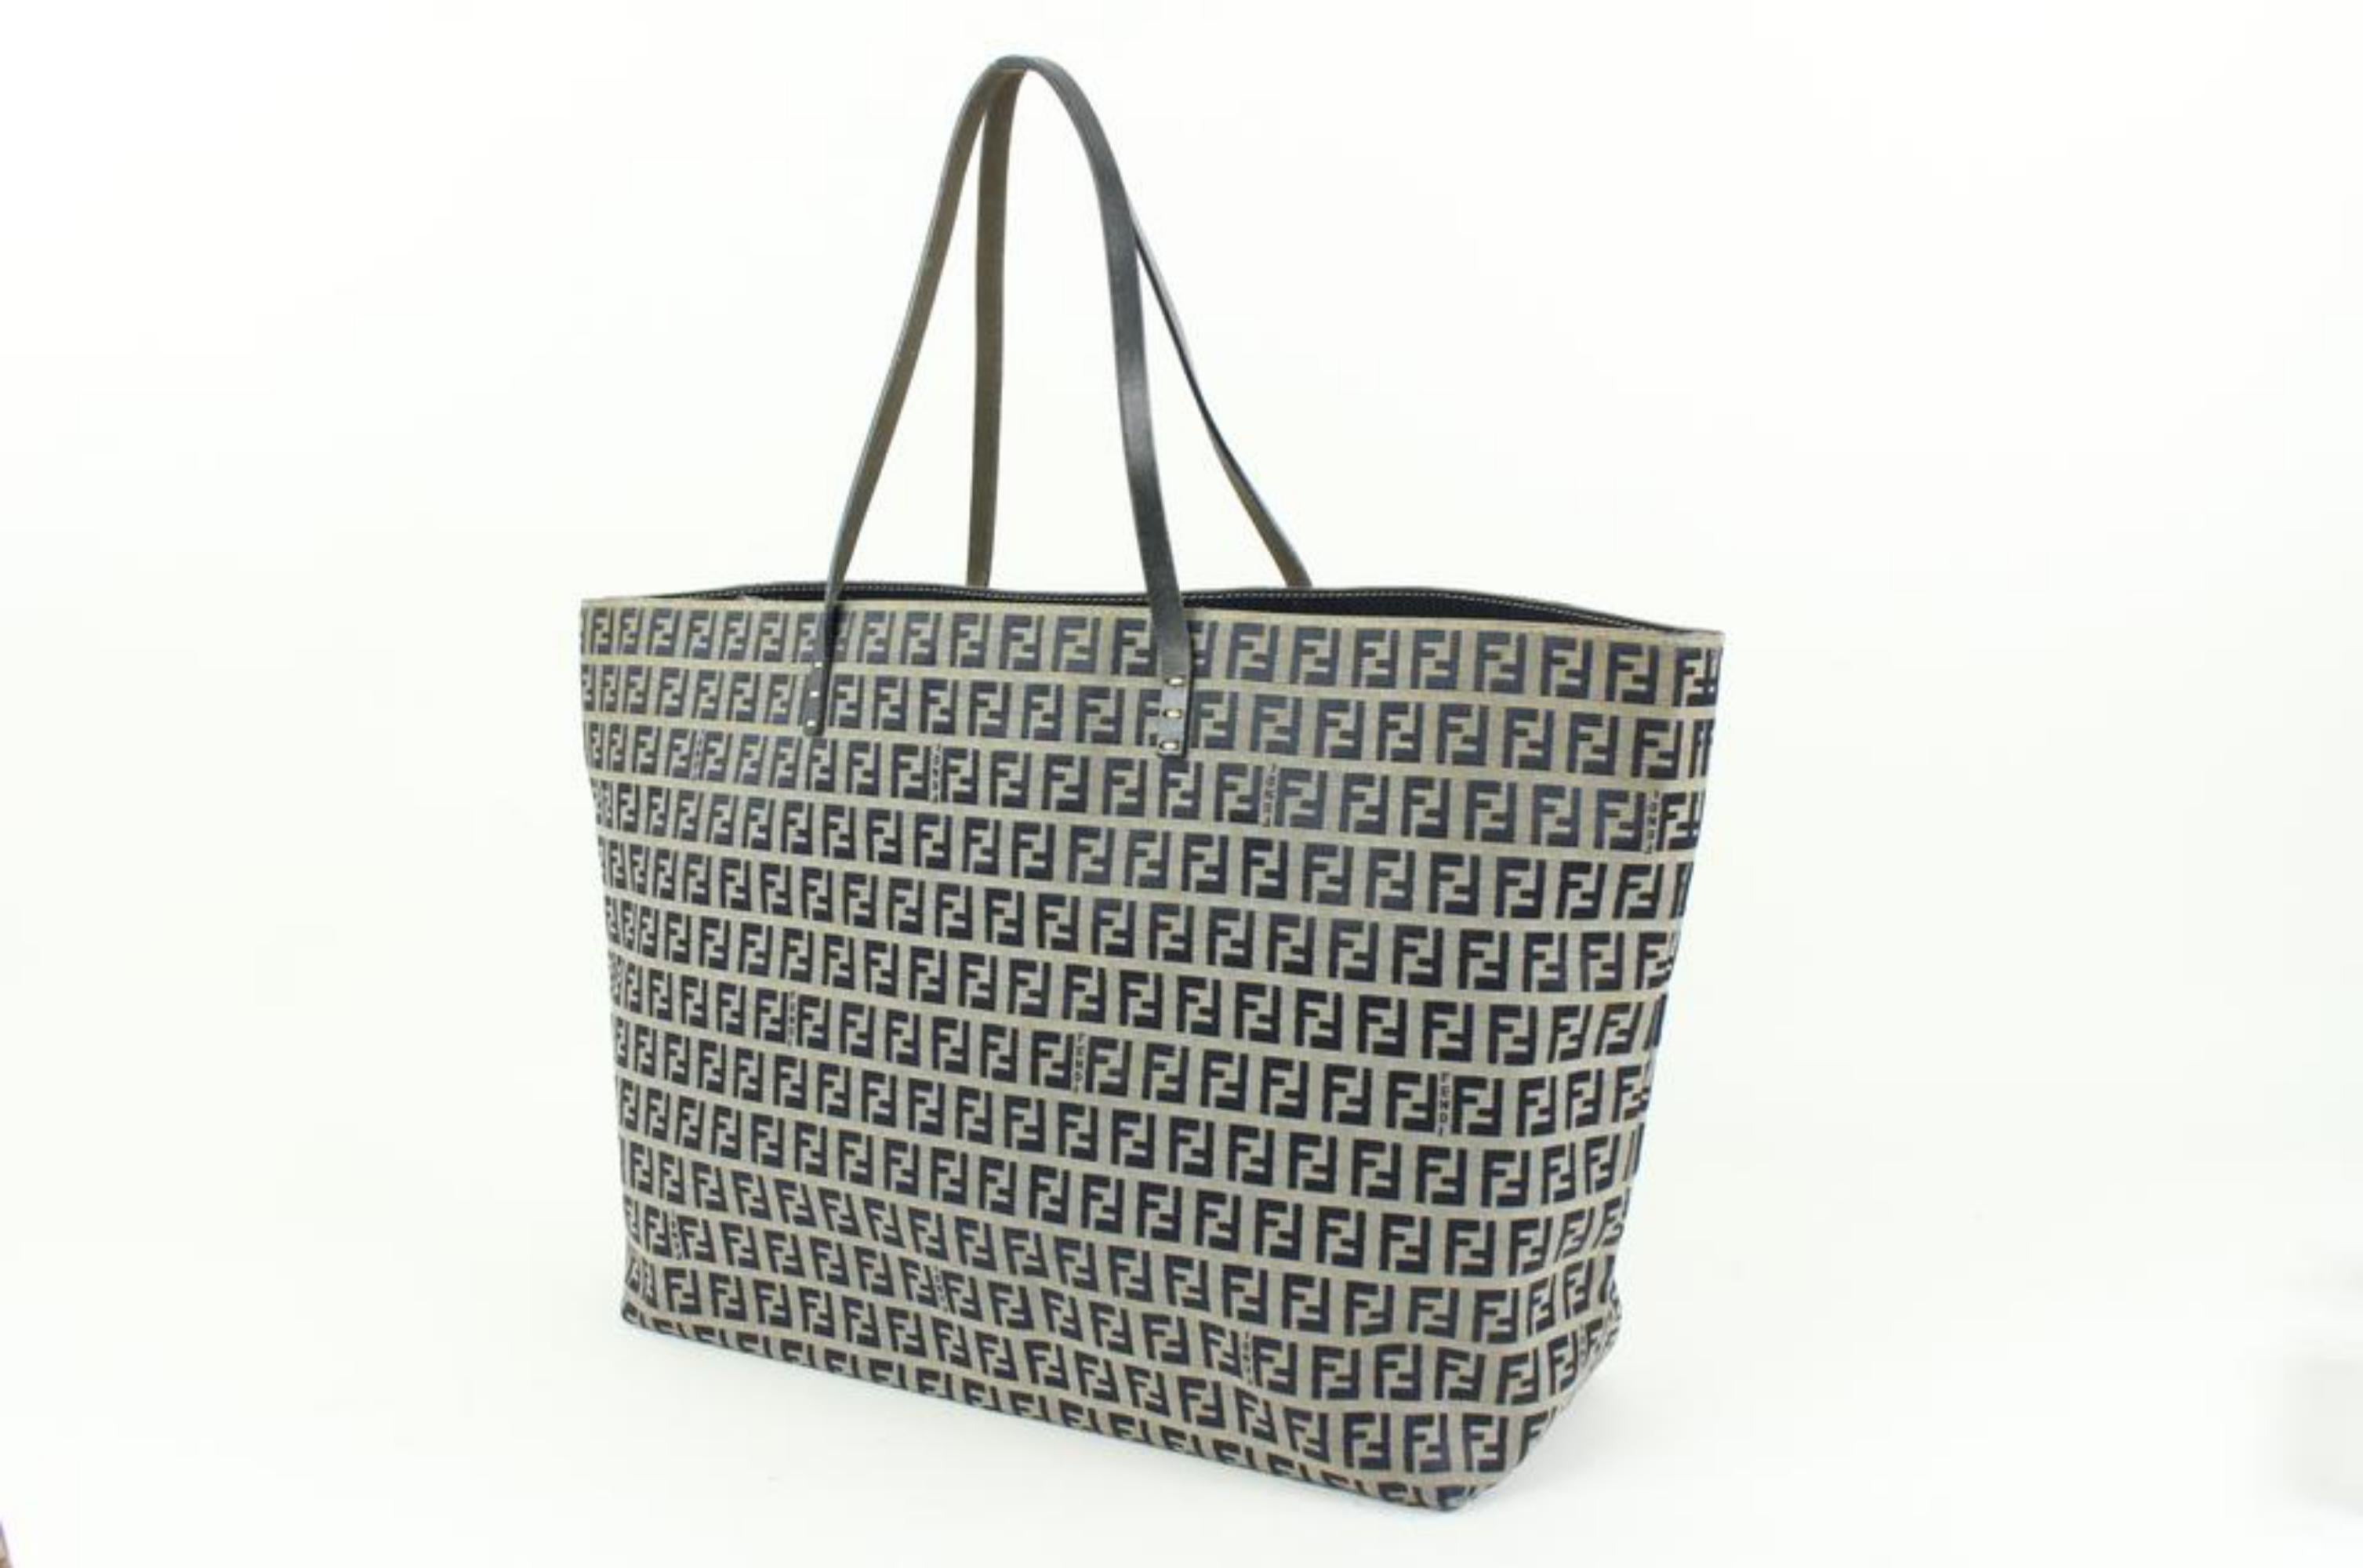 Fendi Navy x Grey Monogram FF Zucca Roll Shopper Tote Bag 60f414s
Date Code/Serial Number: 2305-26667-018
Made In: Italy
Measurements: Length:  18